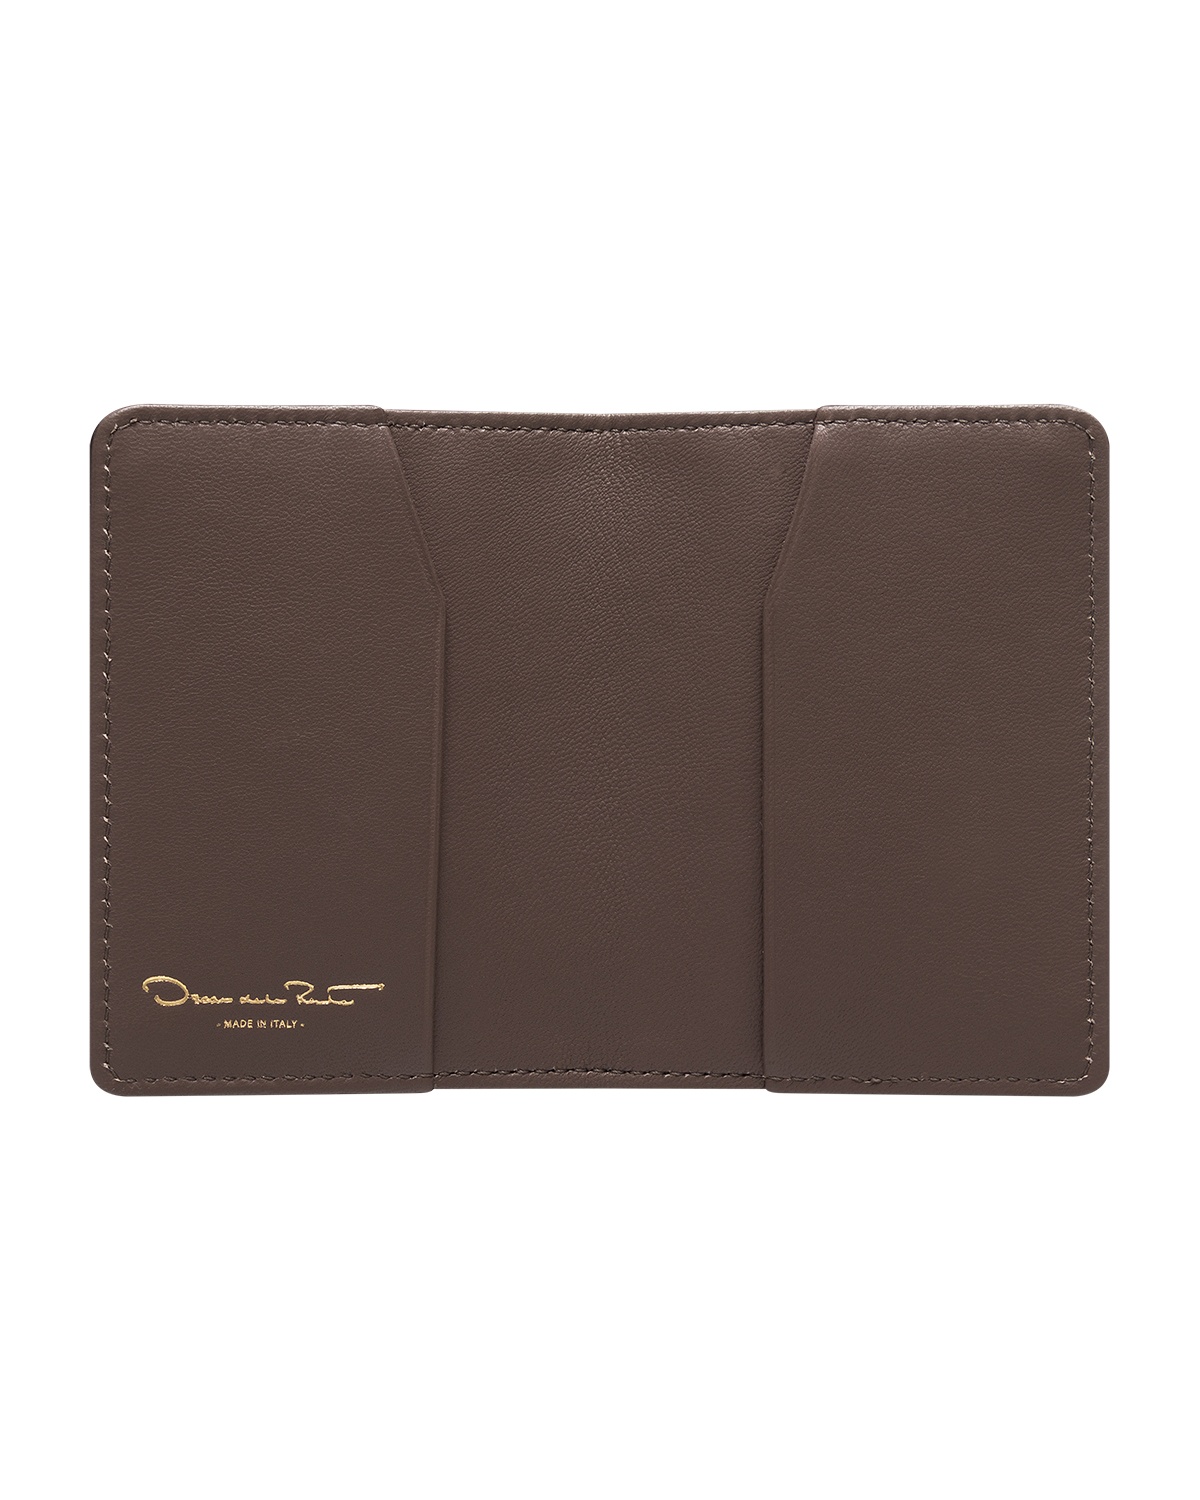 TAUPE CARD CASE - 3